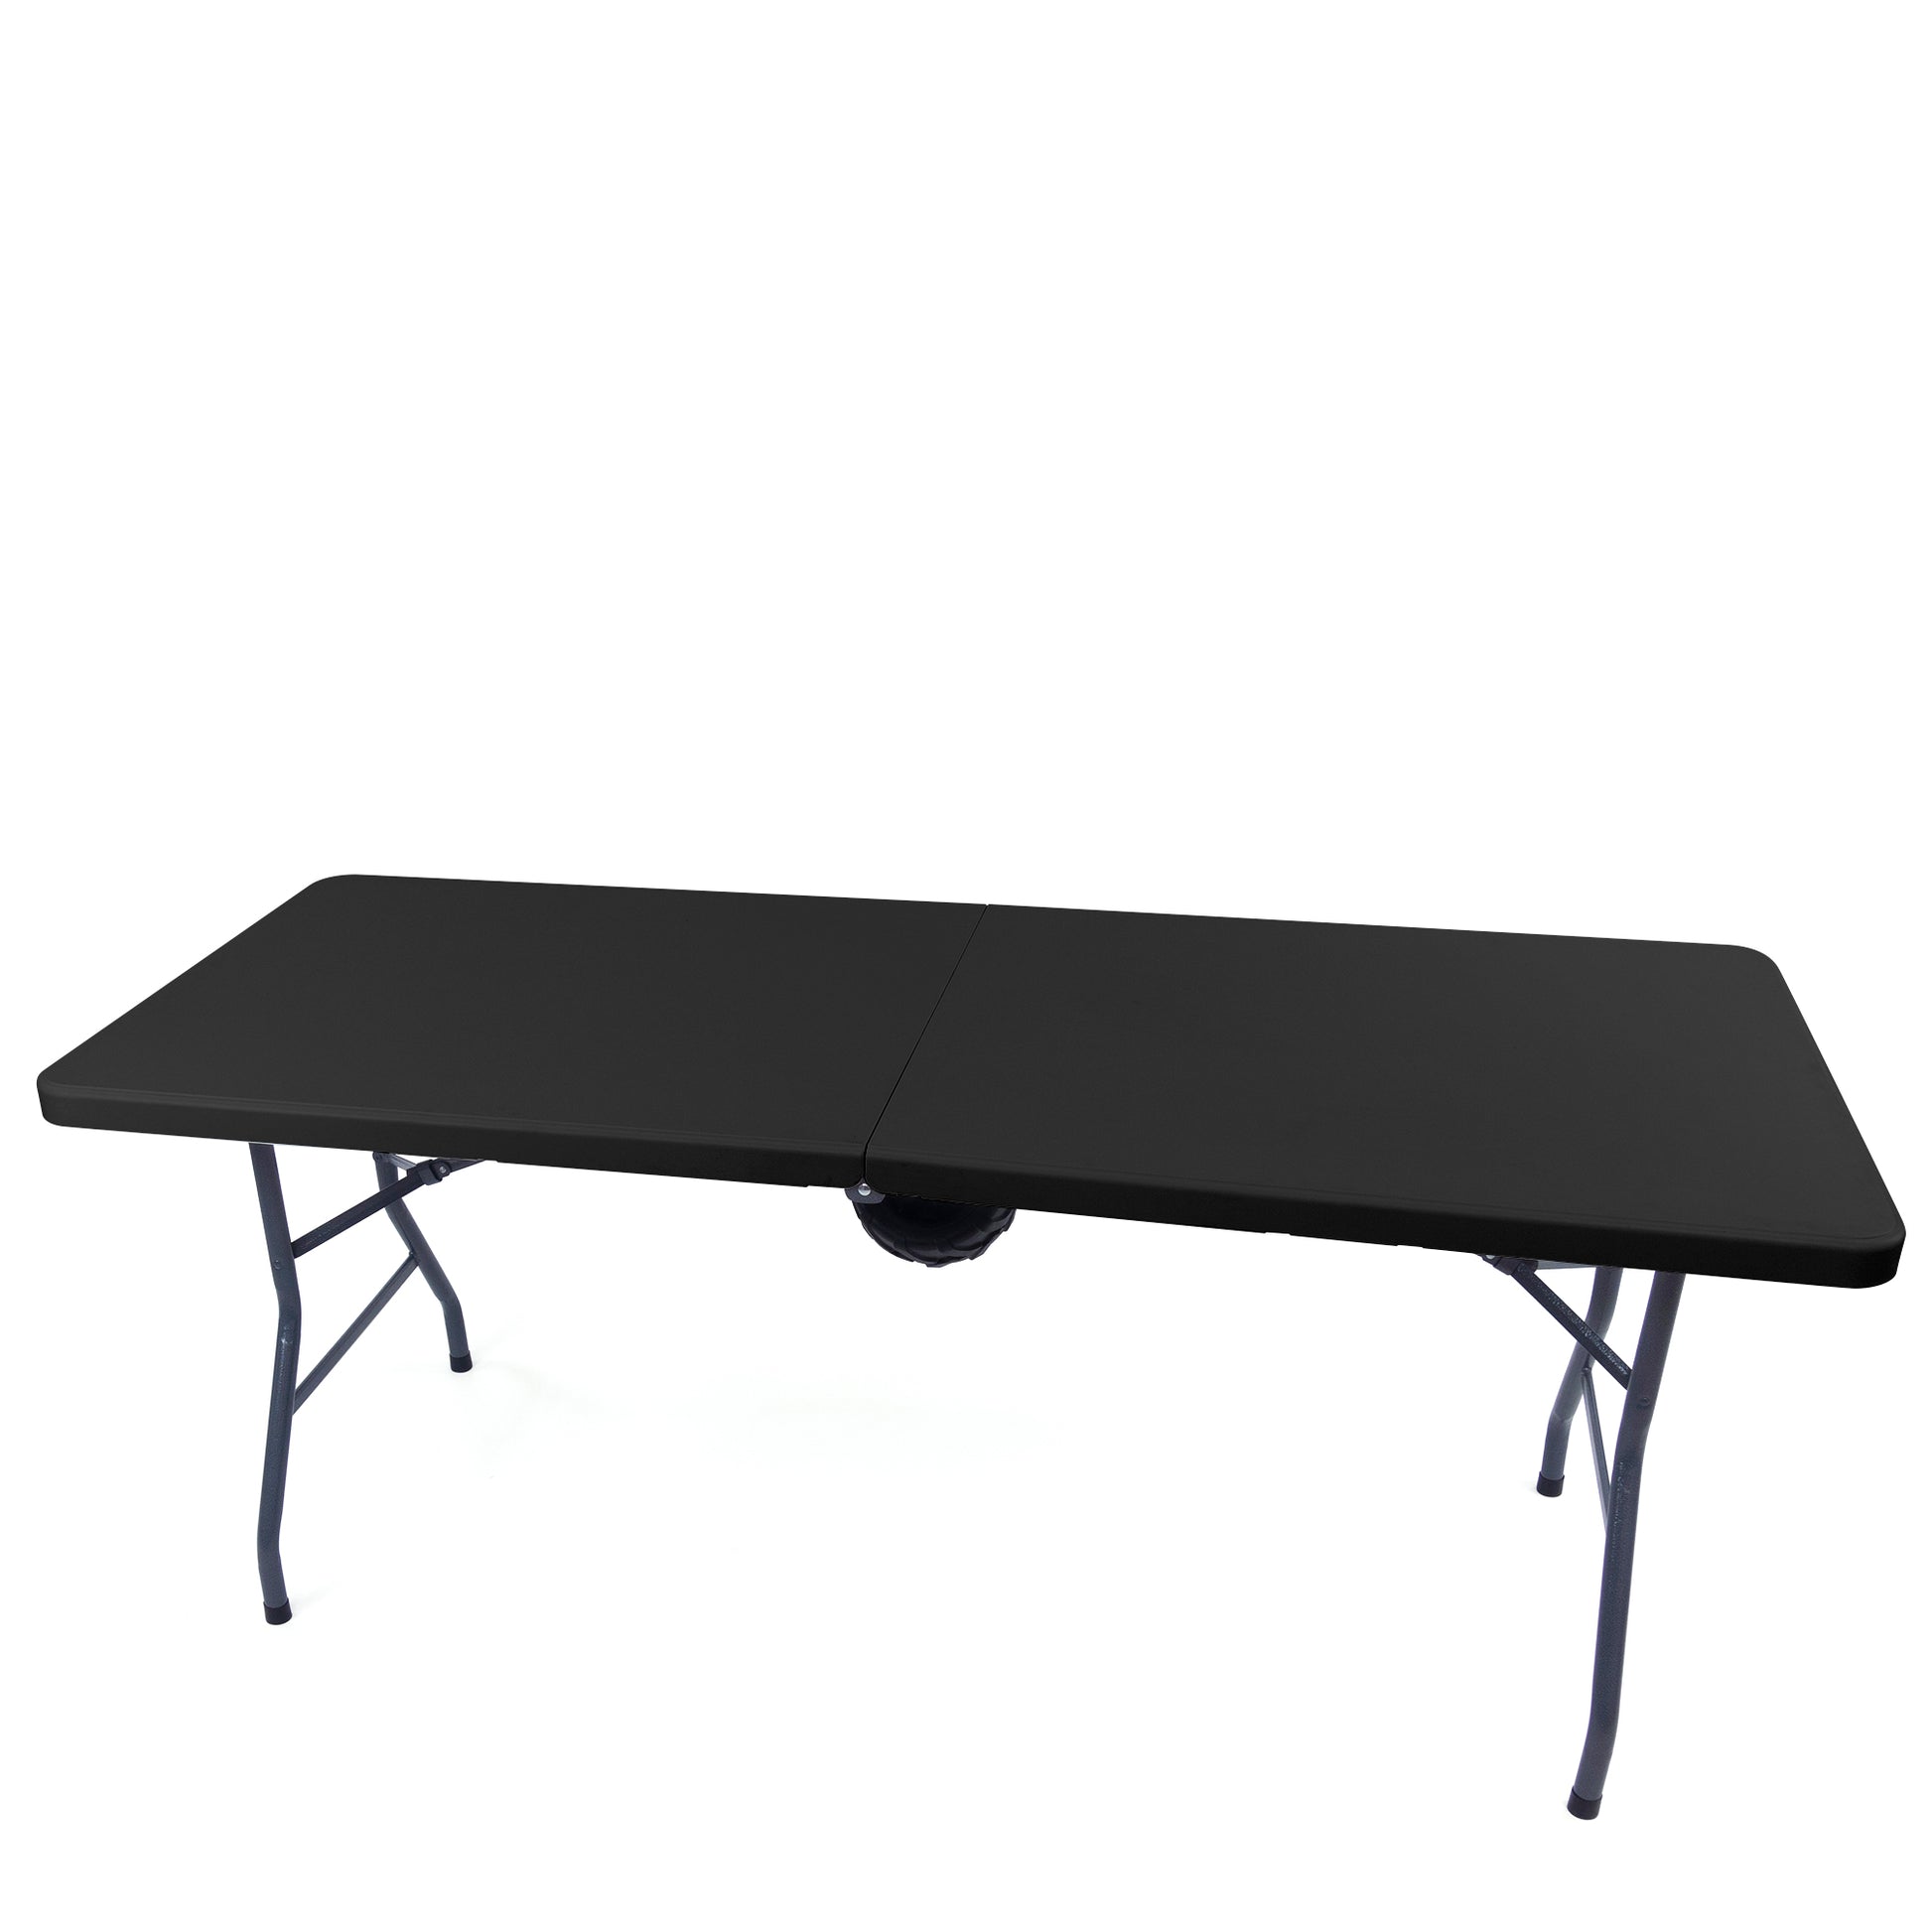 ideal-folding-table-and-chair-for-you-the-rolling-table